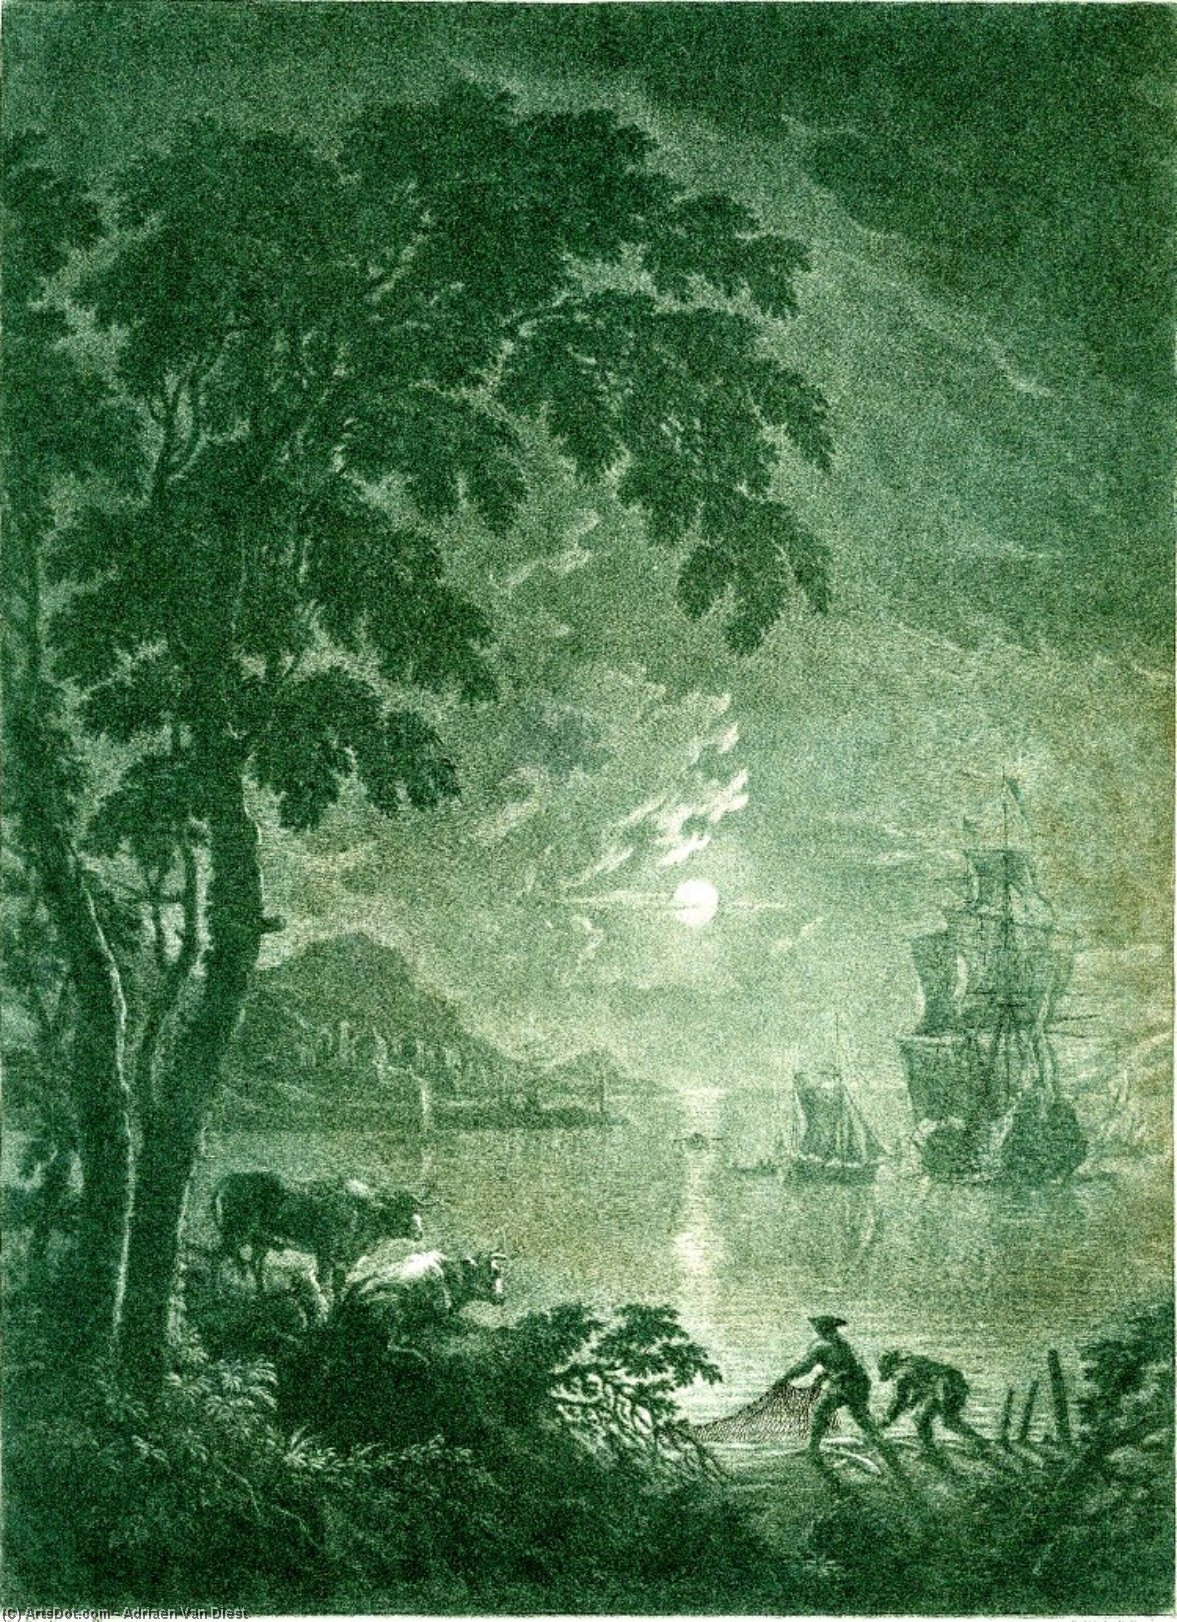 Order Art Reproductions Landscape, Moonlit View Of A Strech Of Calm Water With A Ship To Right And Smaller Boats Around It by Adriaen Van Diest (1589-1662, Netherlands) | ArtsDot.com